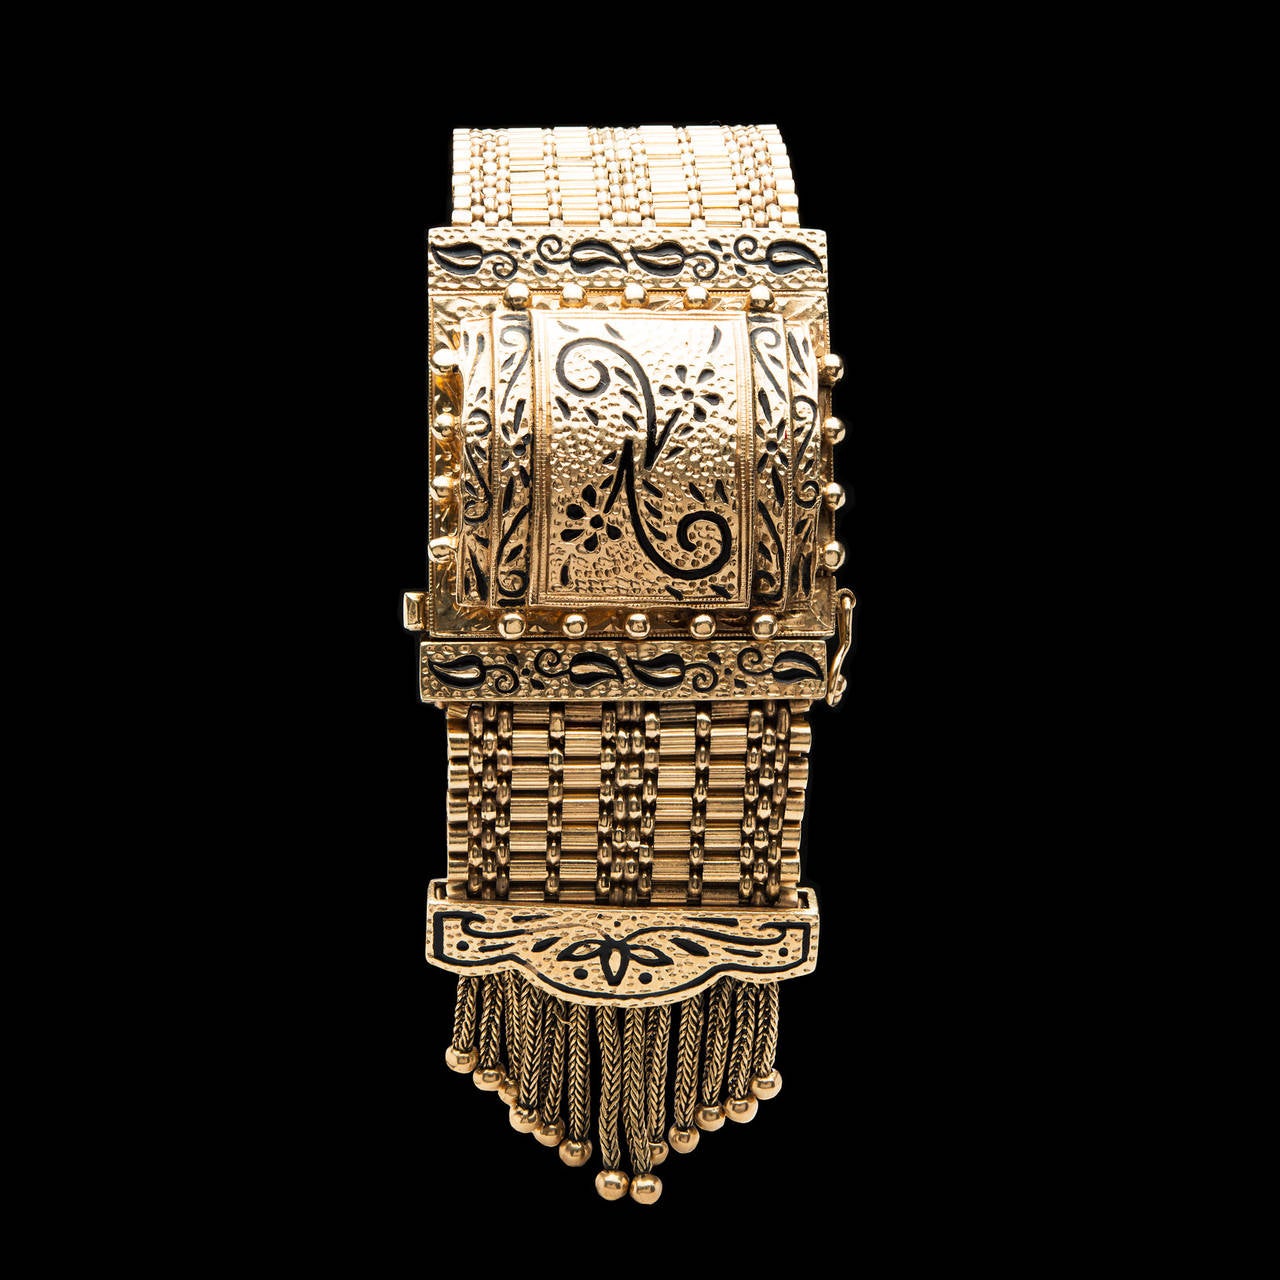 Victorian Style 14Kt Yellow Gold Mesh Bracelet with Tassel Detail Features a Hidden Geneva Watch Measuring 18.5mm x 14.5mm Encased in a Decorative Covering. The bracelet is 6.75 inches long and 26mm wide, weighing 80.6 grams.